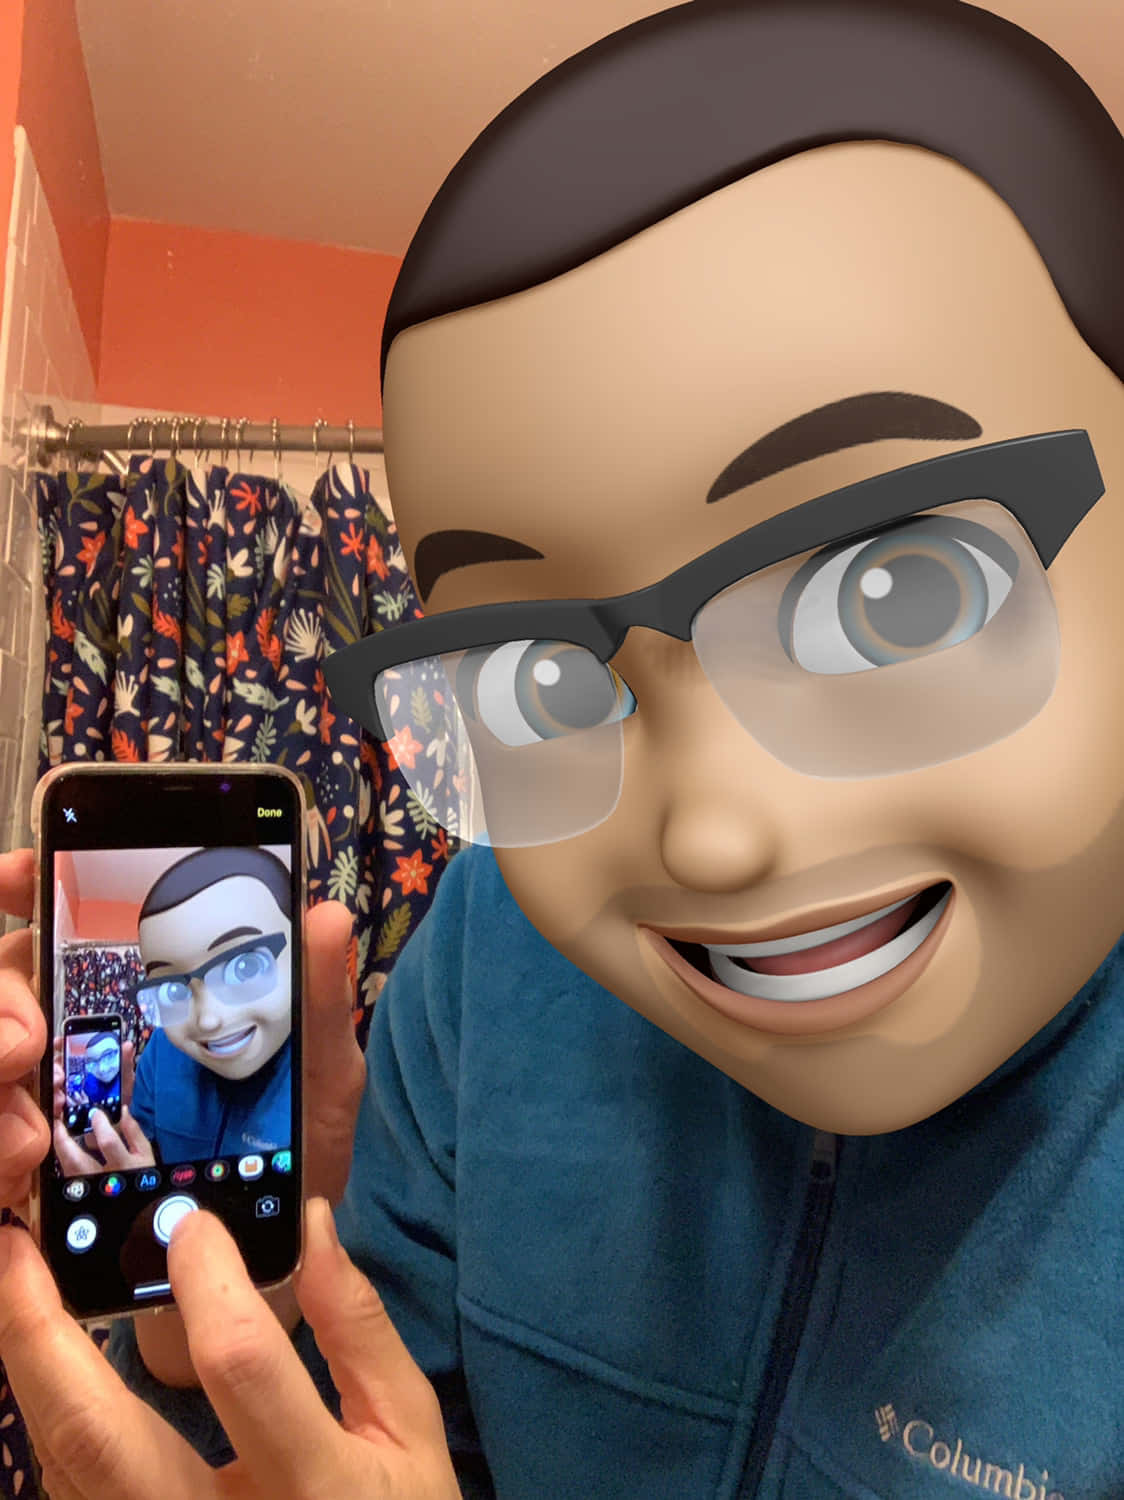 Send your friends a quirky Animoji and make them laugh! Wallpaper